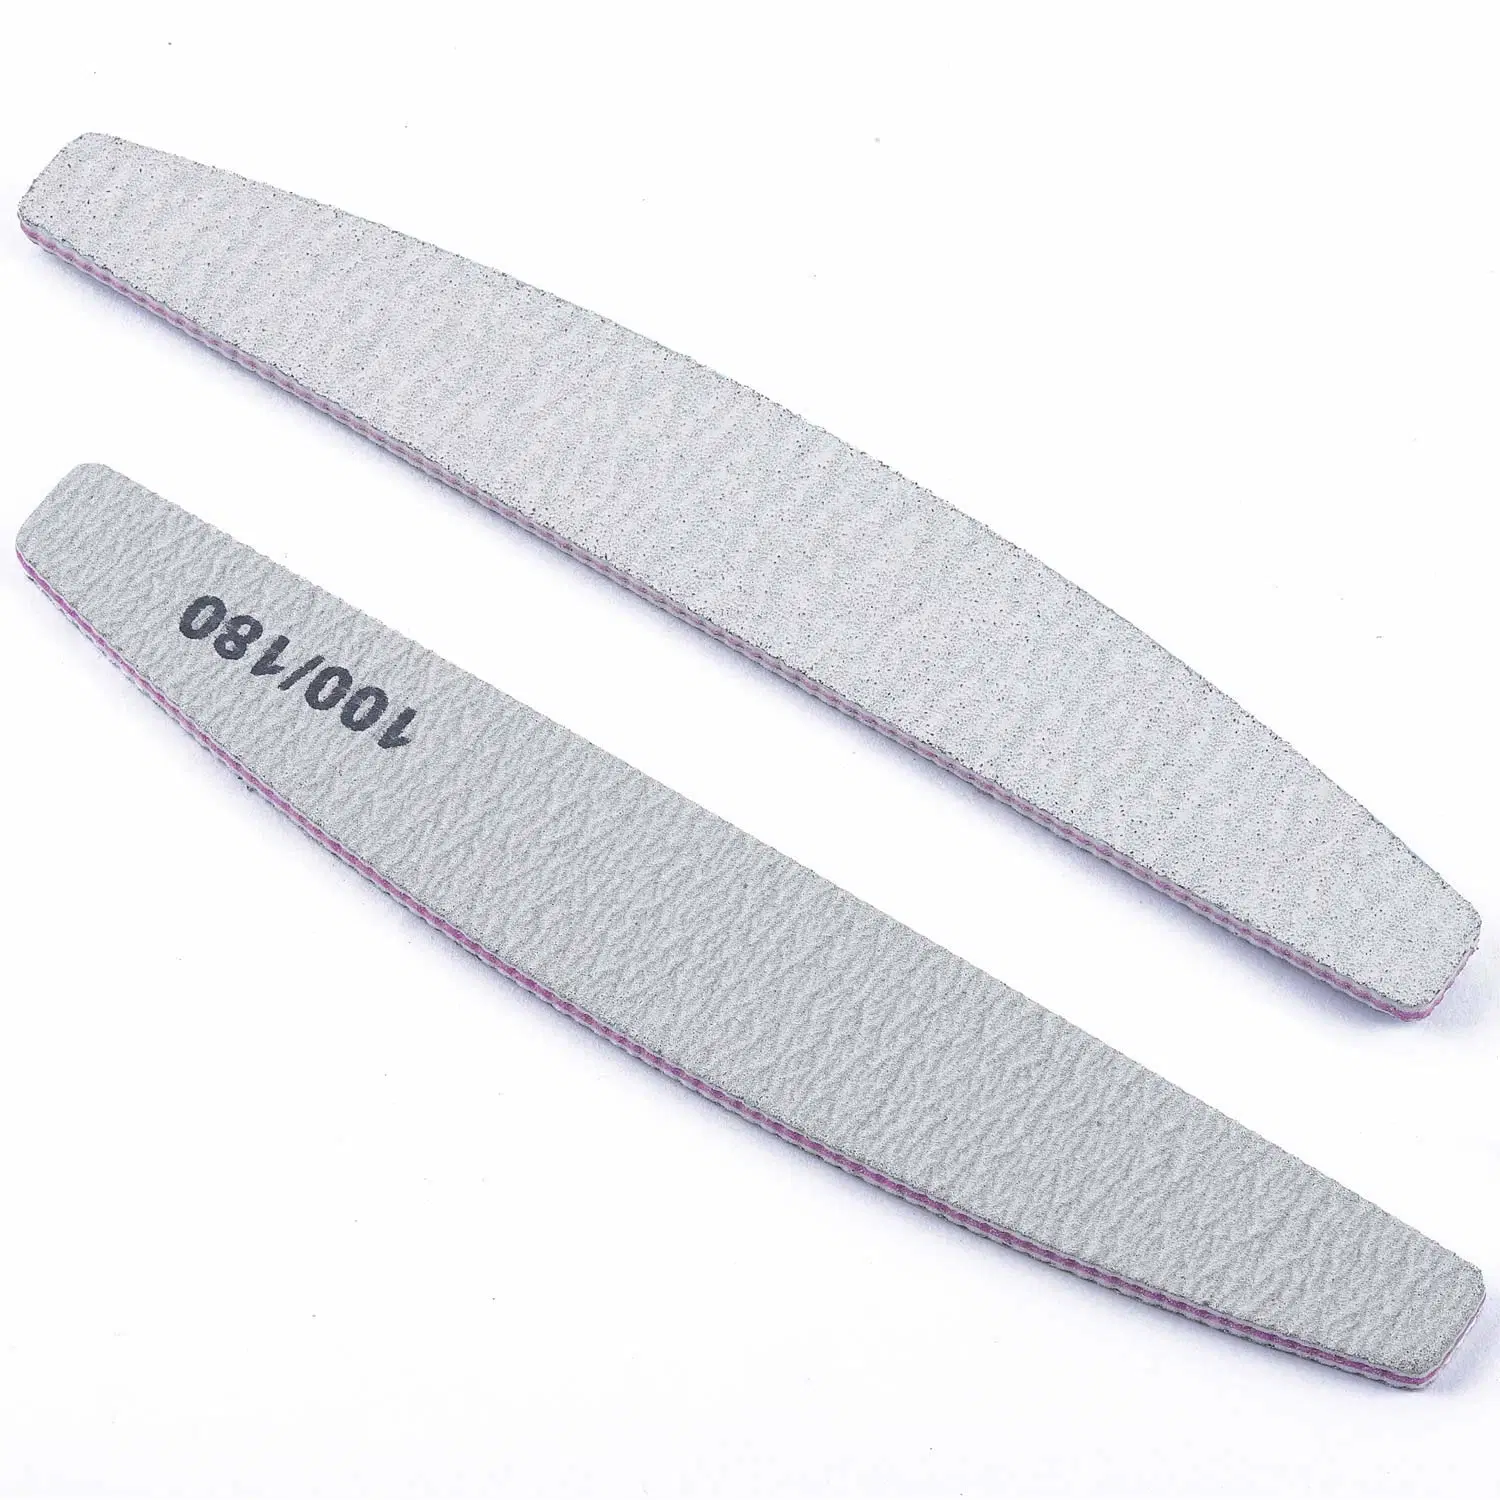 100/180 Grits Nail Files and Buffers Professional Double Sided Emery Boards Manicure Tool for Acrylic Nails